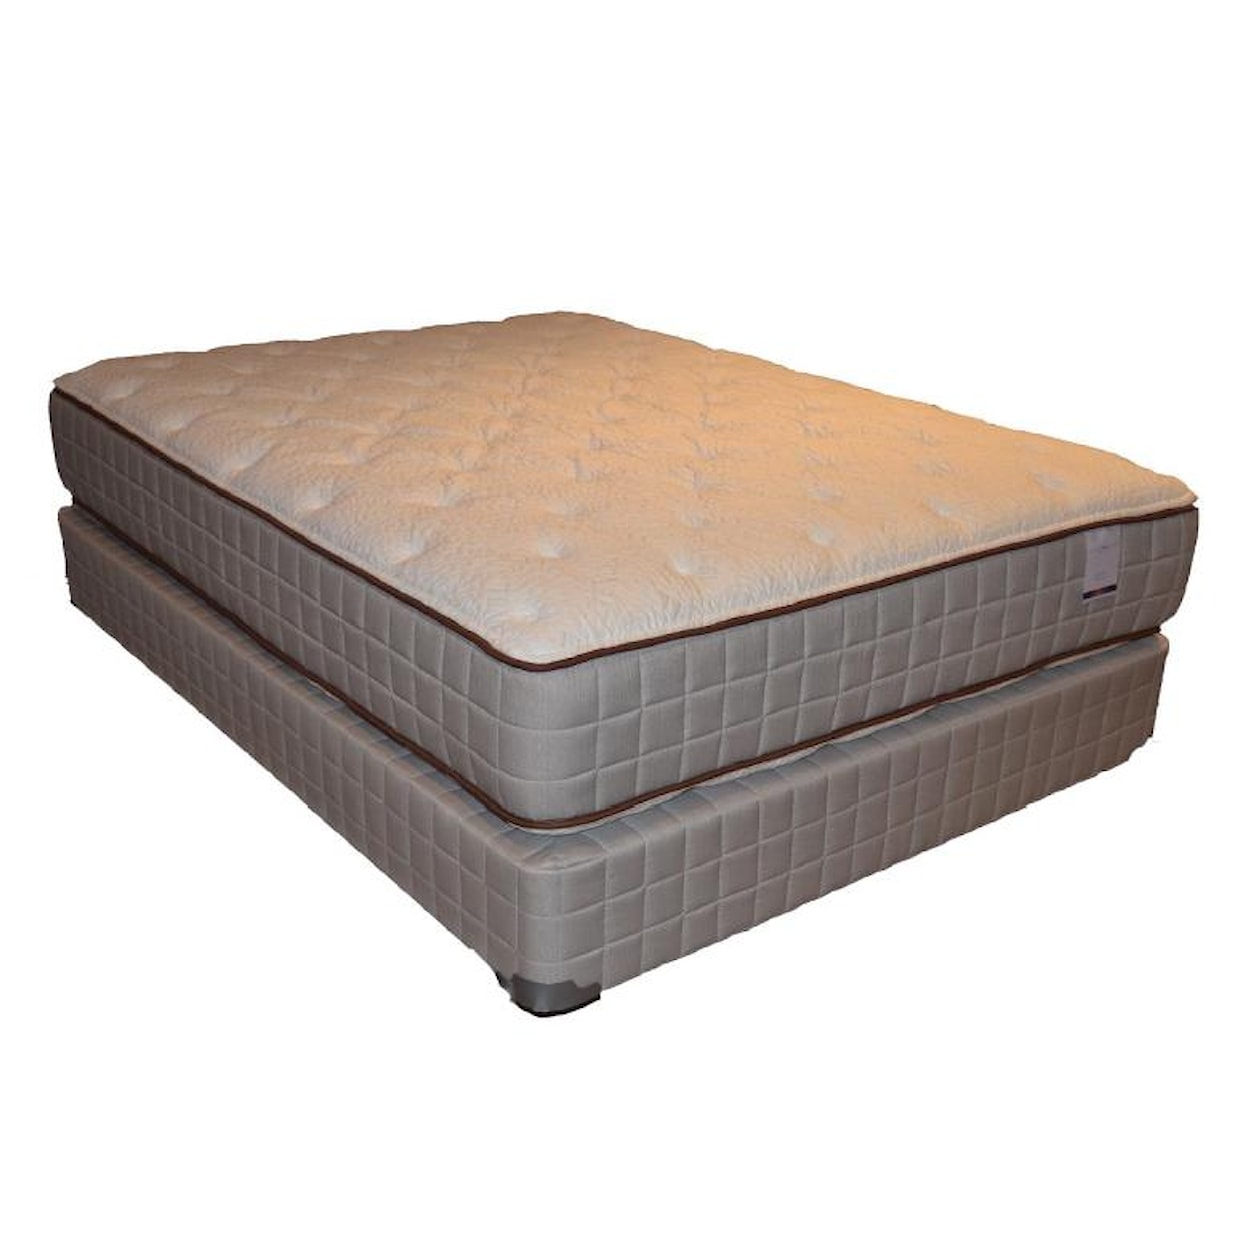 Corsicana 275 Two Sided Plush Queen Two Sided Plush Mattress